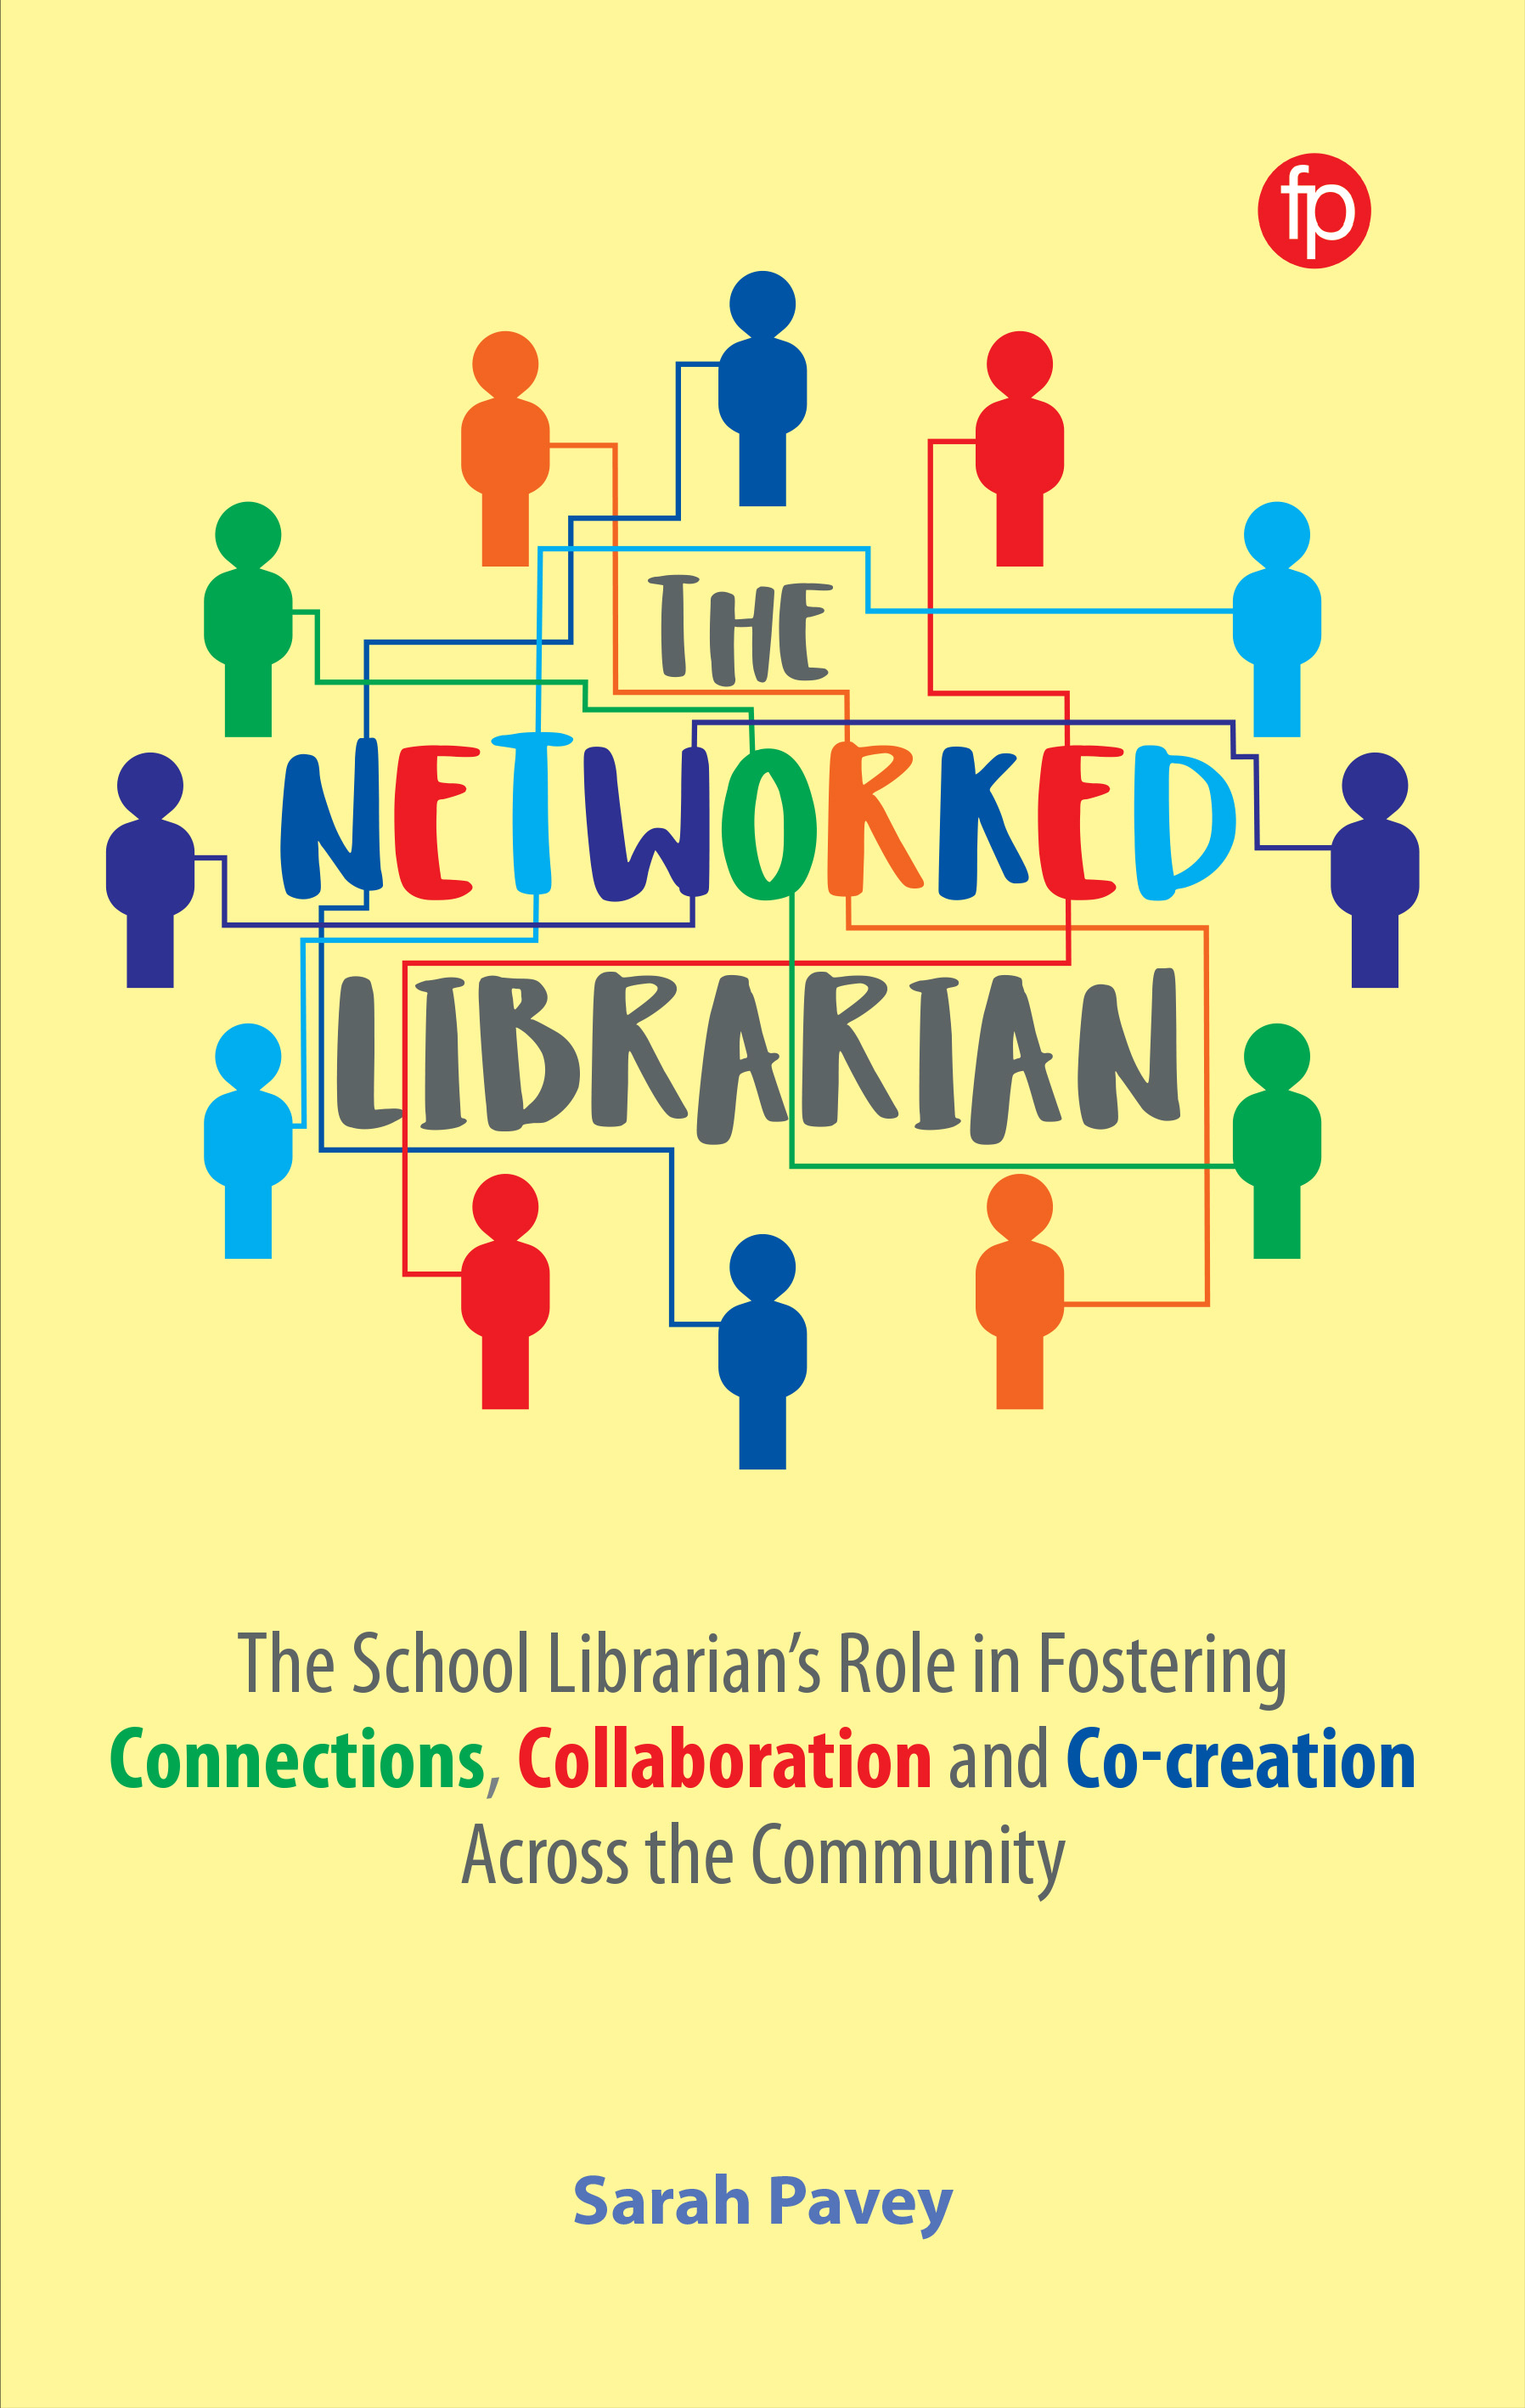 Image for The Networked Librarian: The School Librarian's Role in Fostering Connections, Collaboration and Co-creation Across the Community